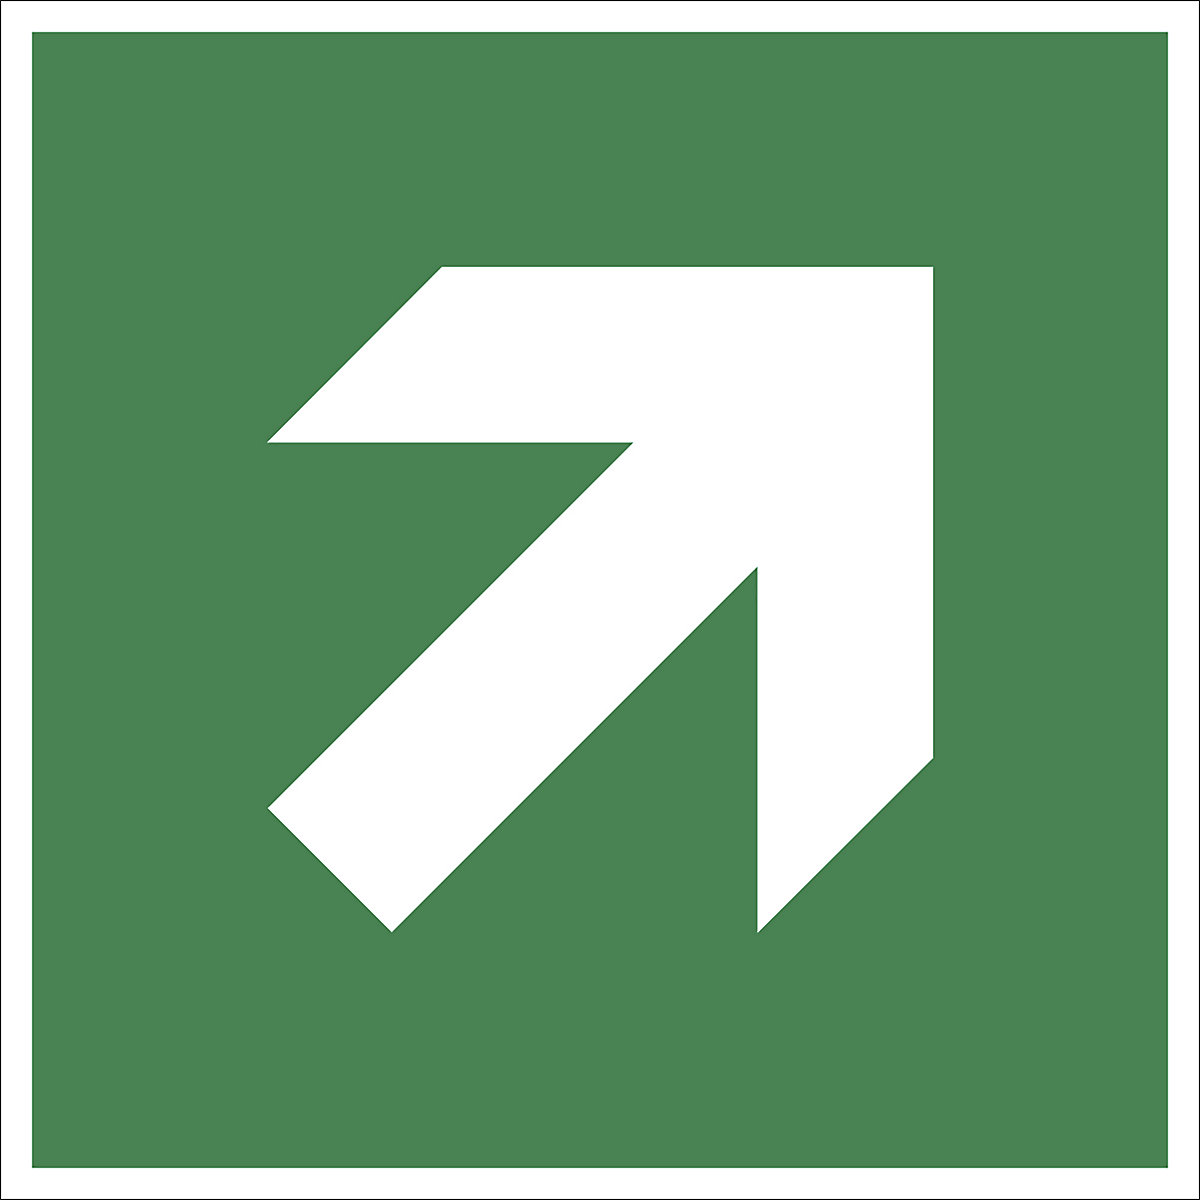 Emergency exit signs, arrow pointing diagonally, only in combination with emergency sign, pack of 10, plastic, 150 x 150 mm